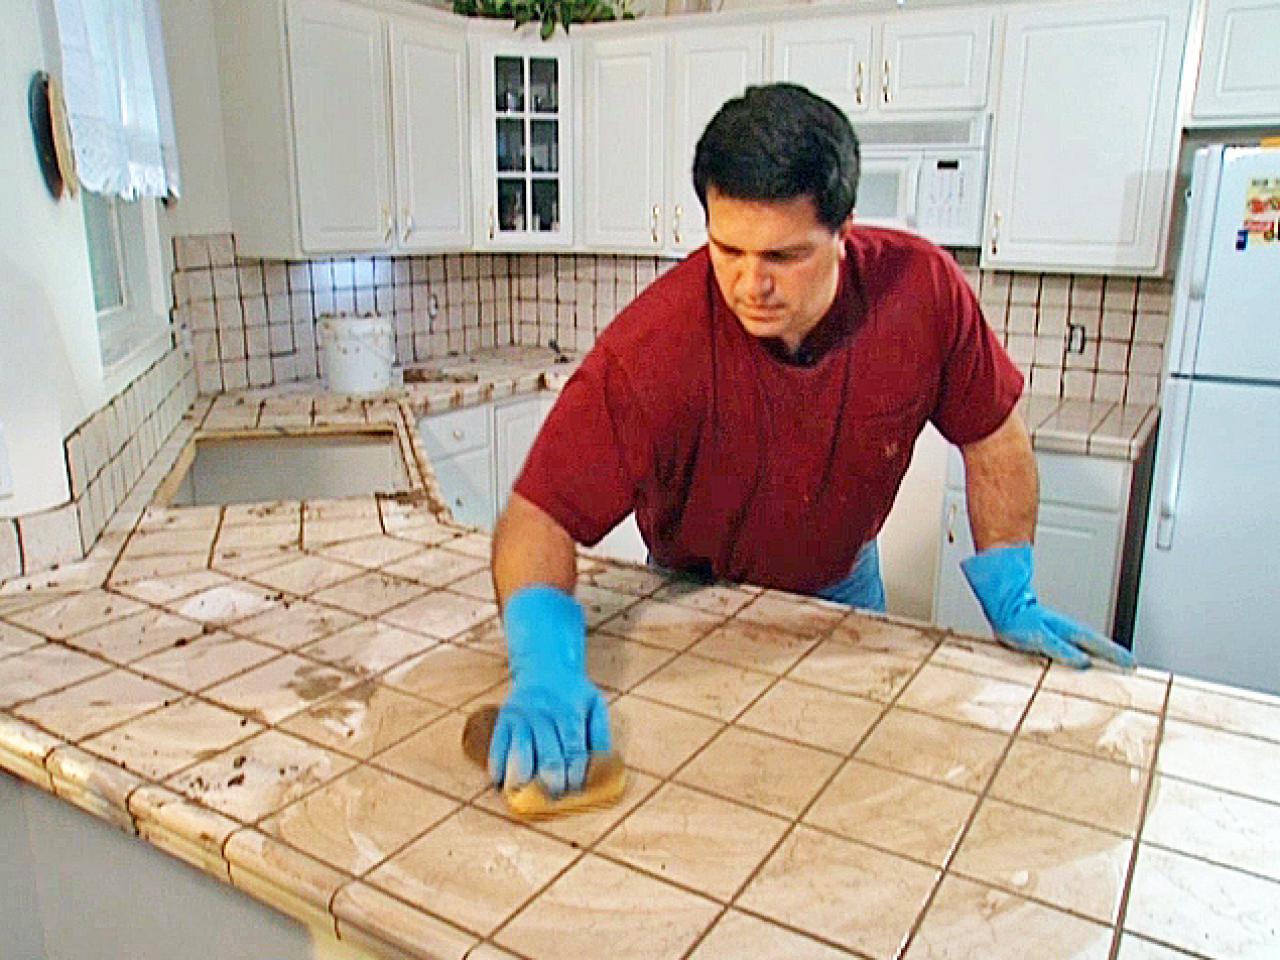 Install Tile Over Laminate Countertop, How To Cover Up Old Tile Countertops